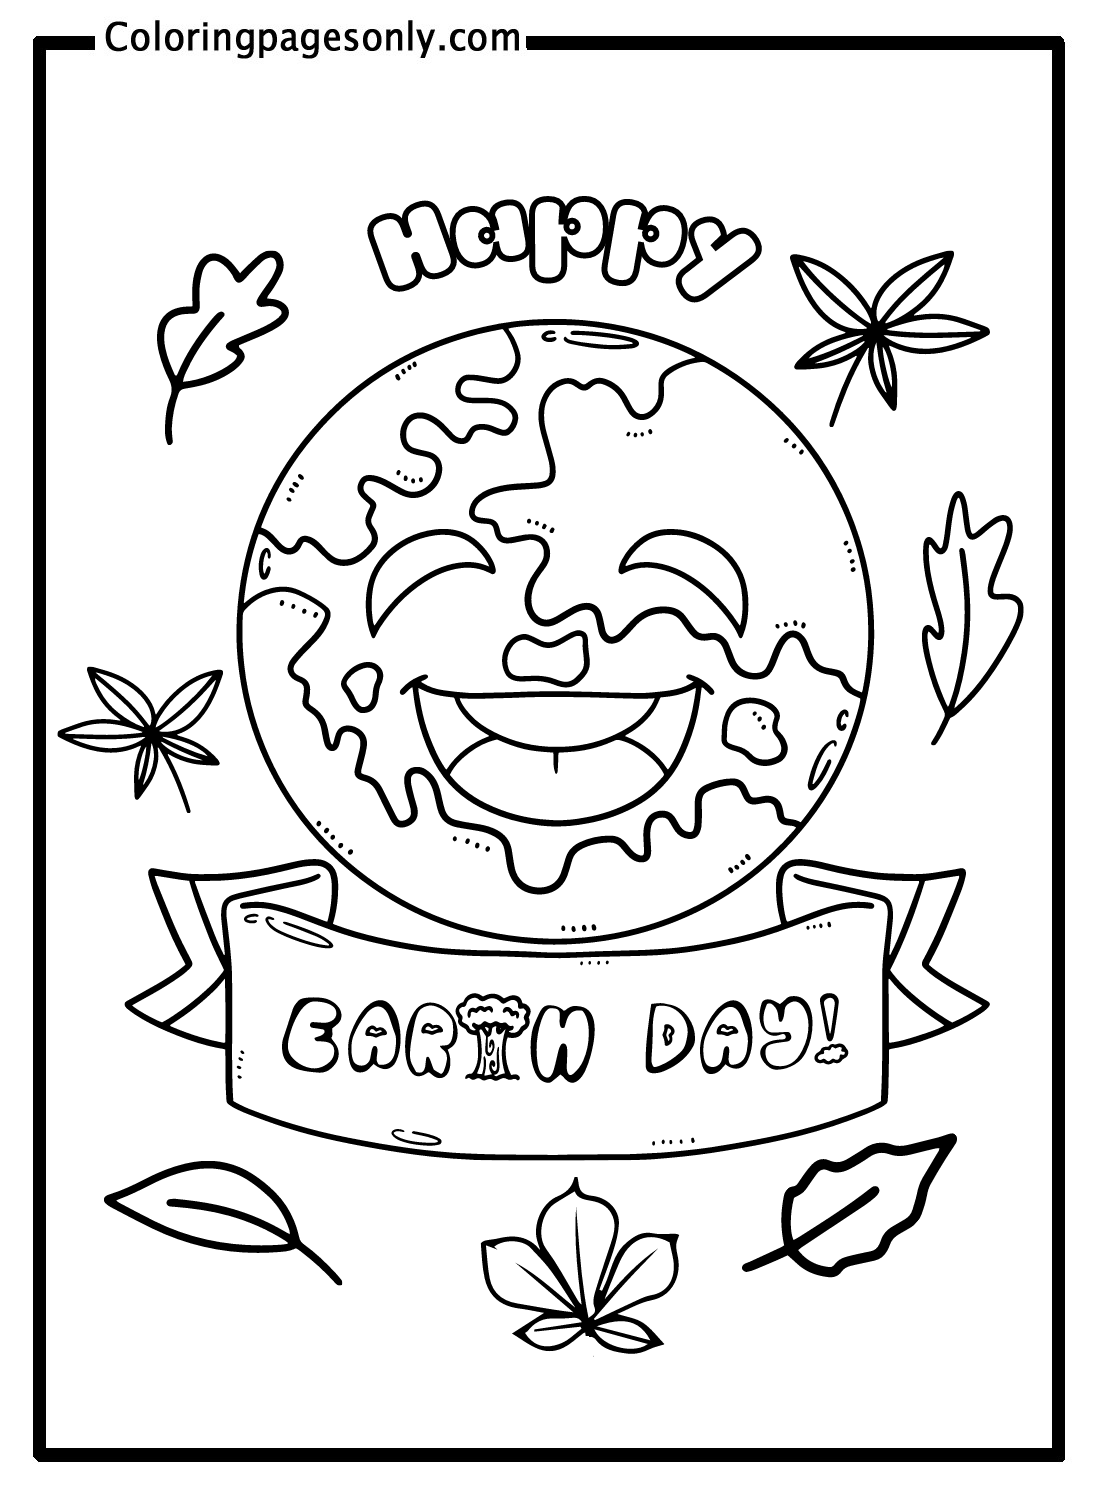 Happy Earth Day for Kids Coloring Page